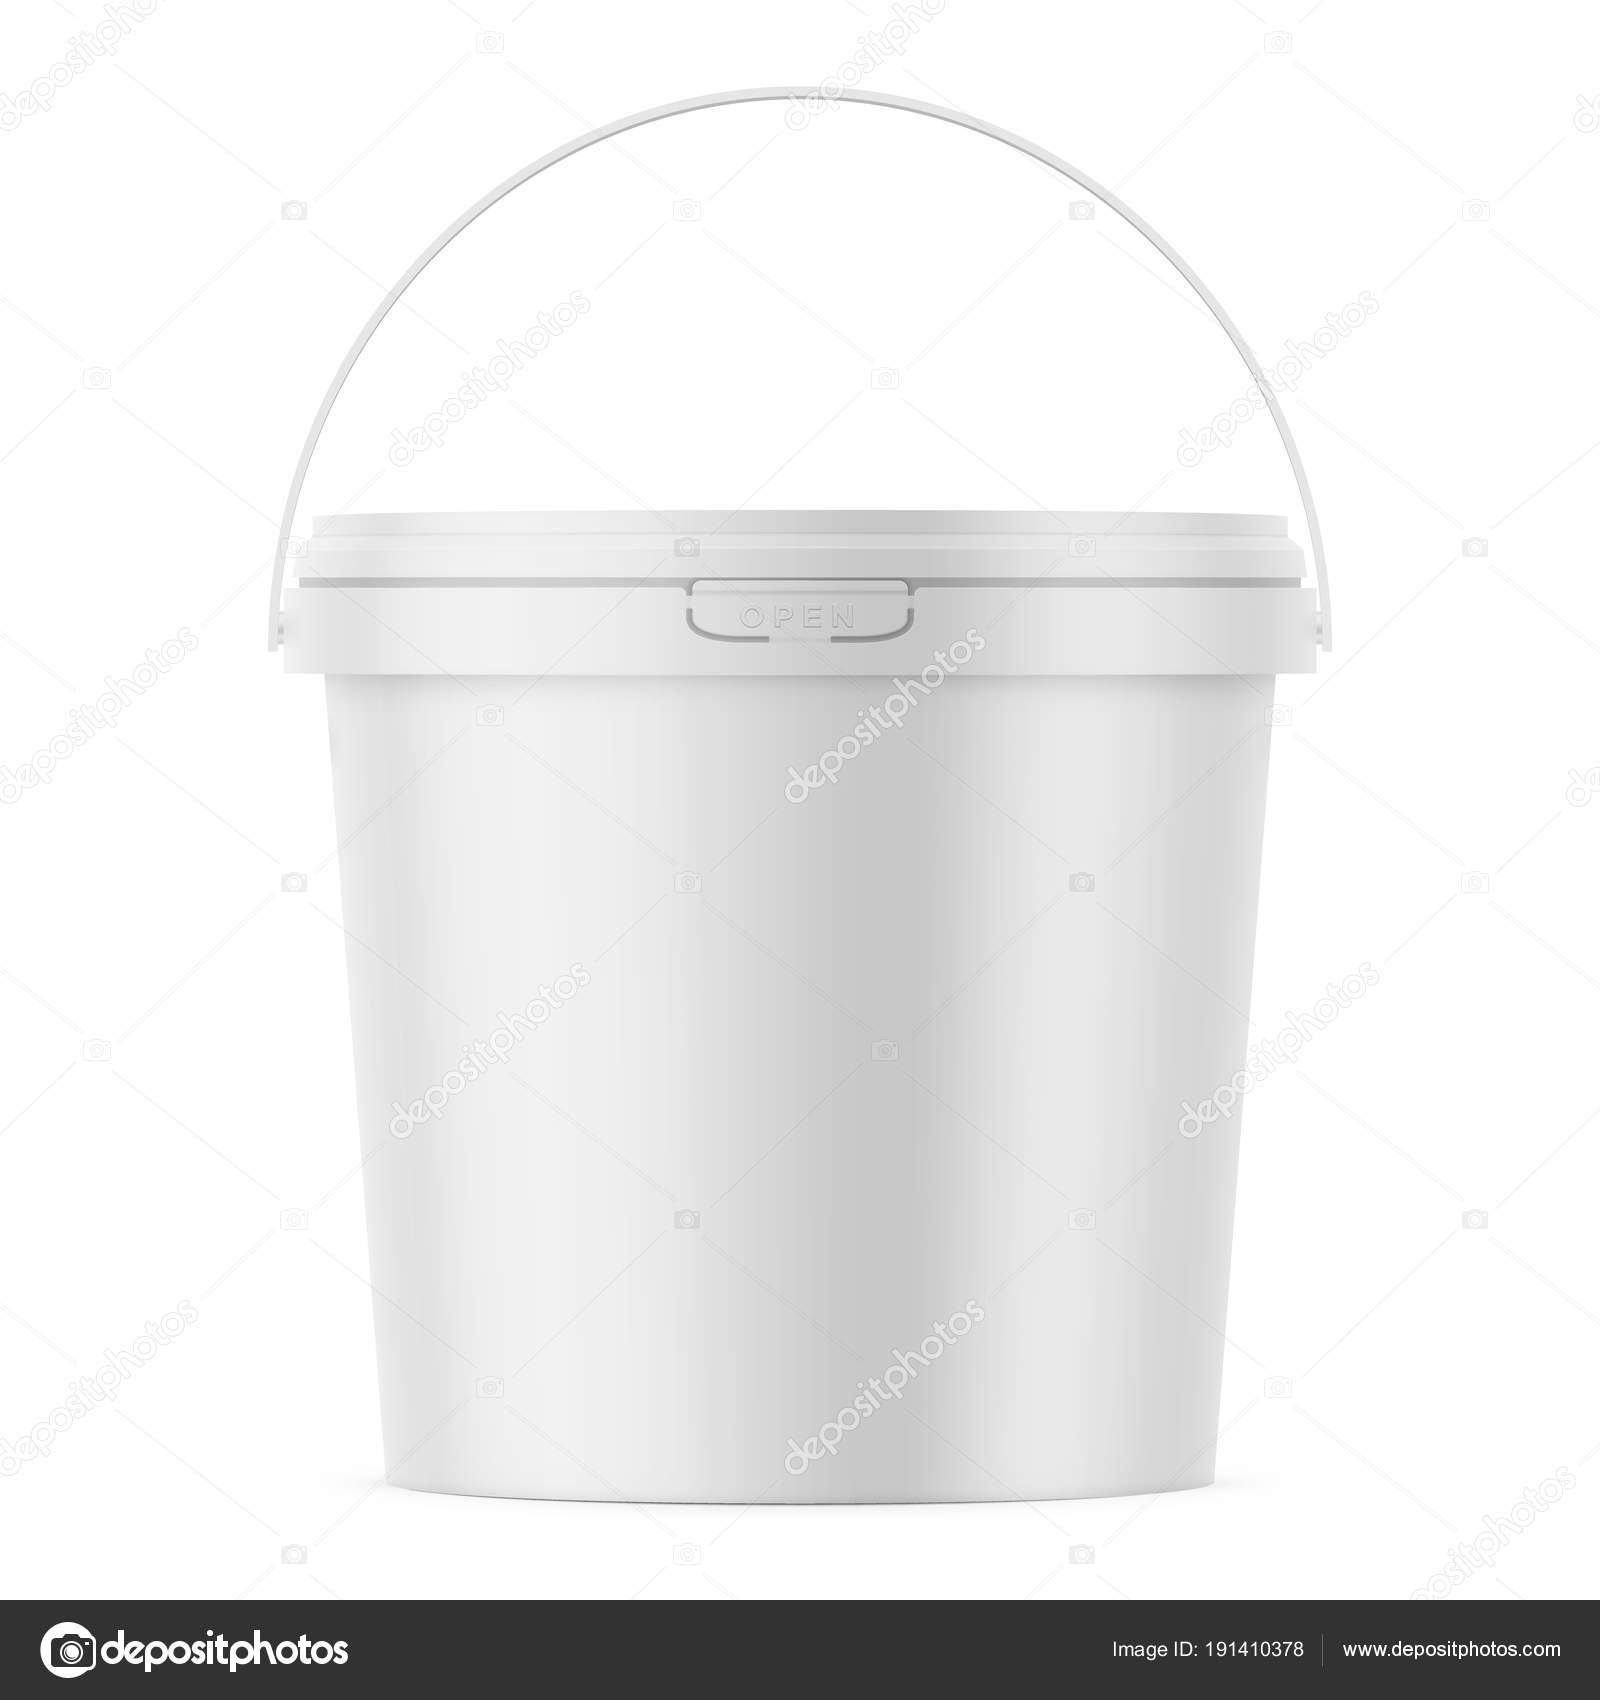 Download White Matte Plastic Bucket Mockup Template Vector Image By C Gruffi Vector Stock 191410378